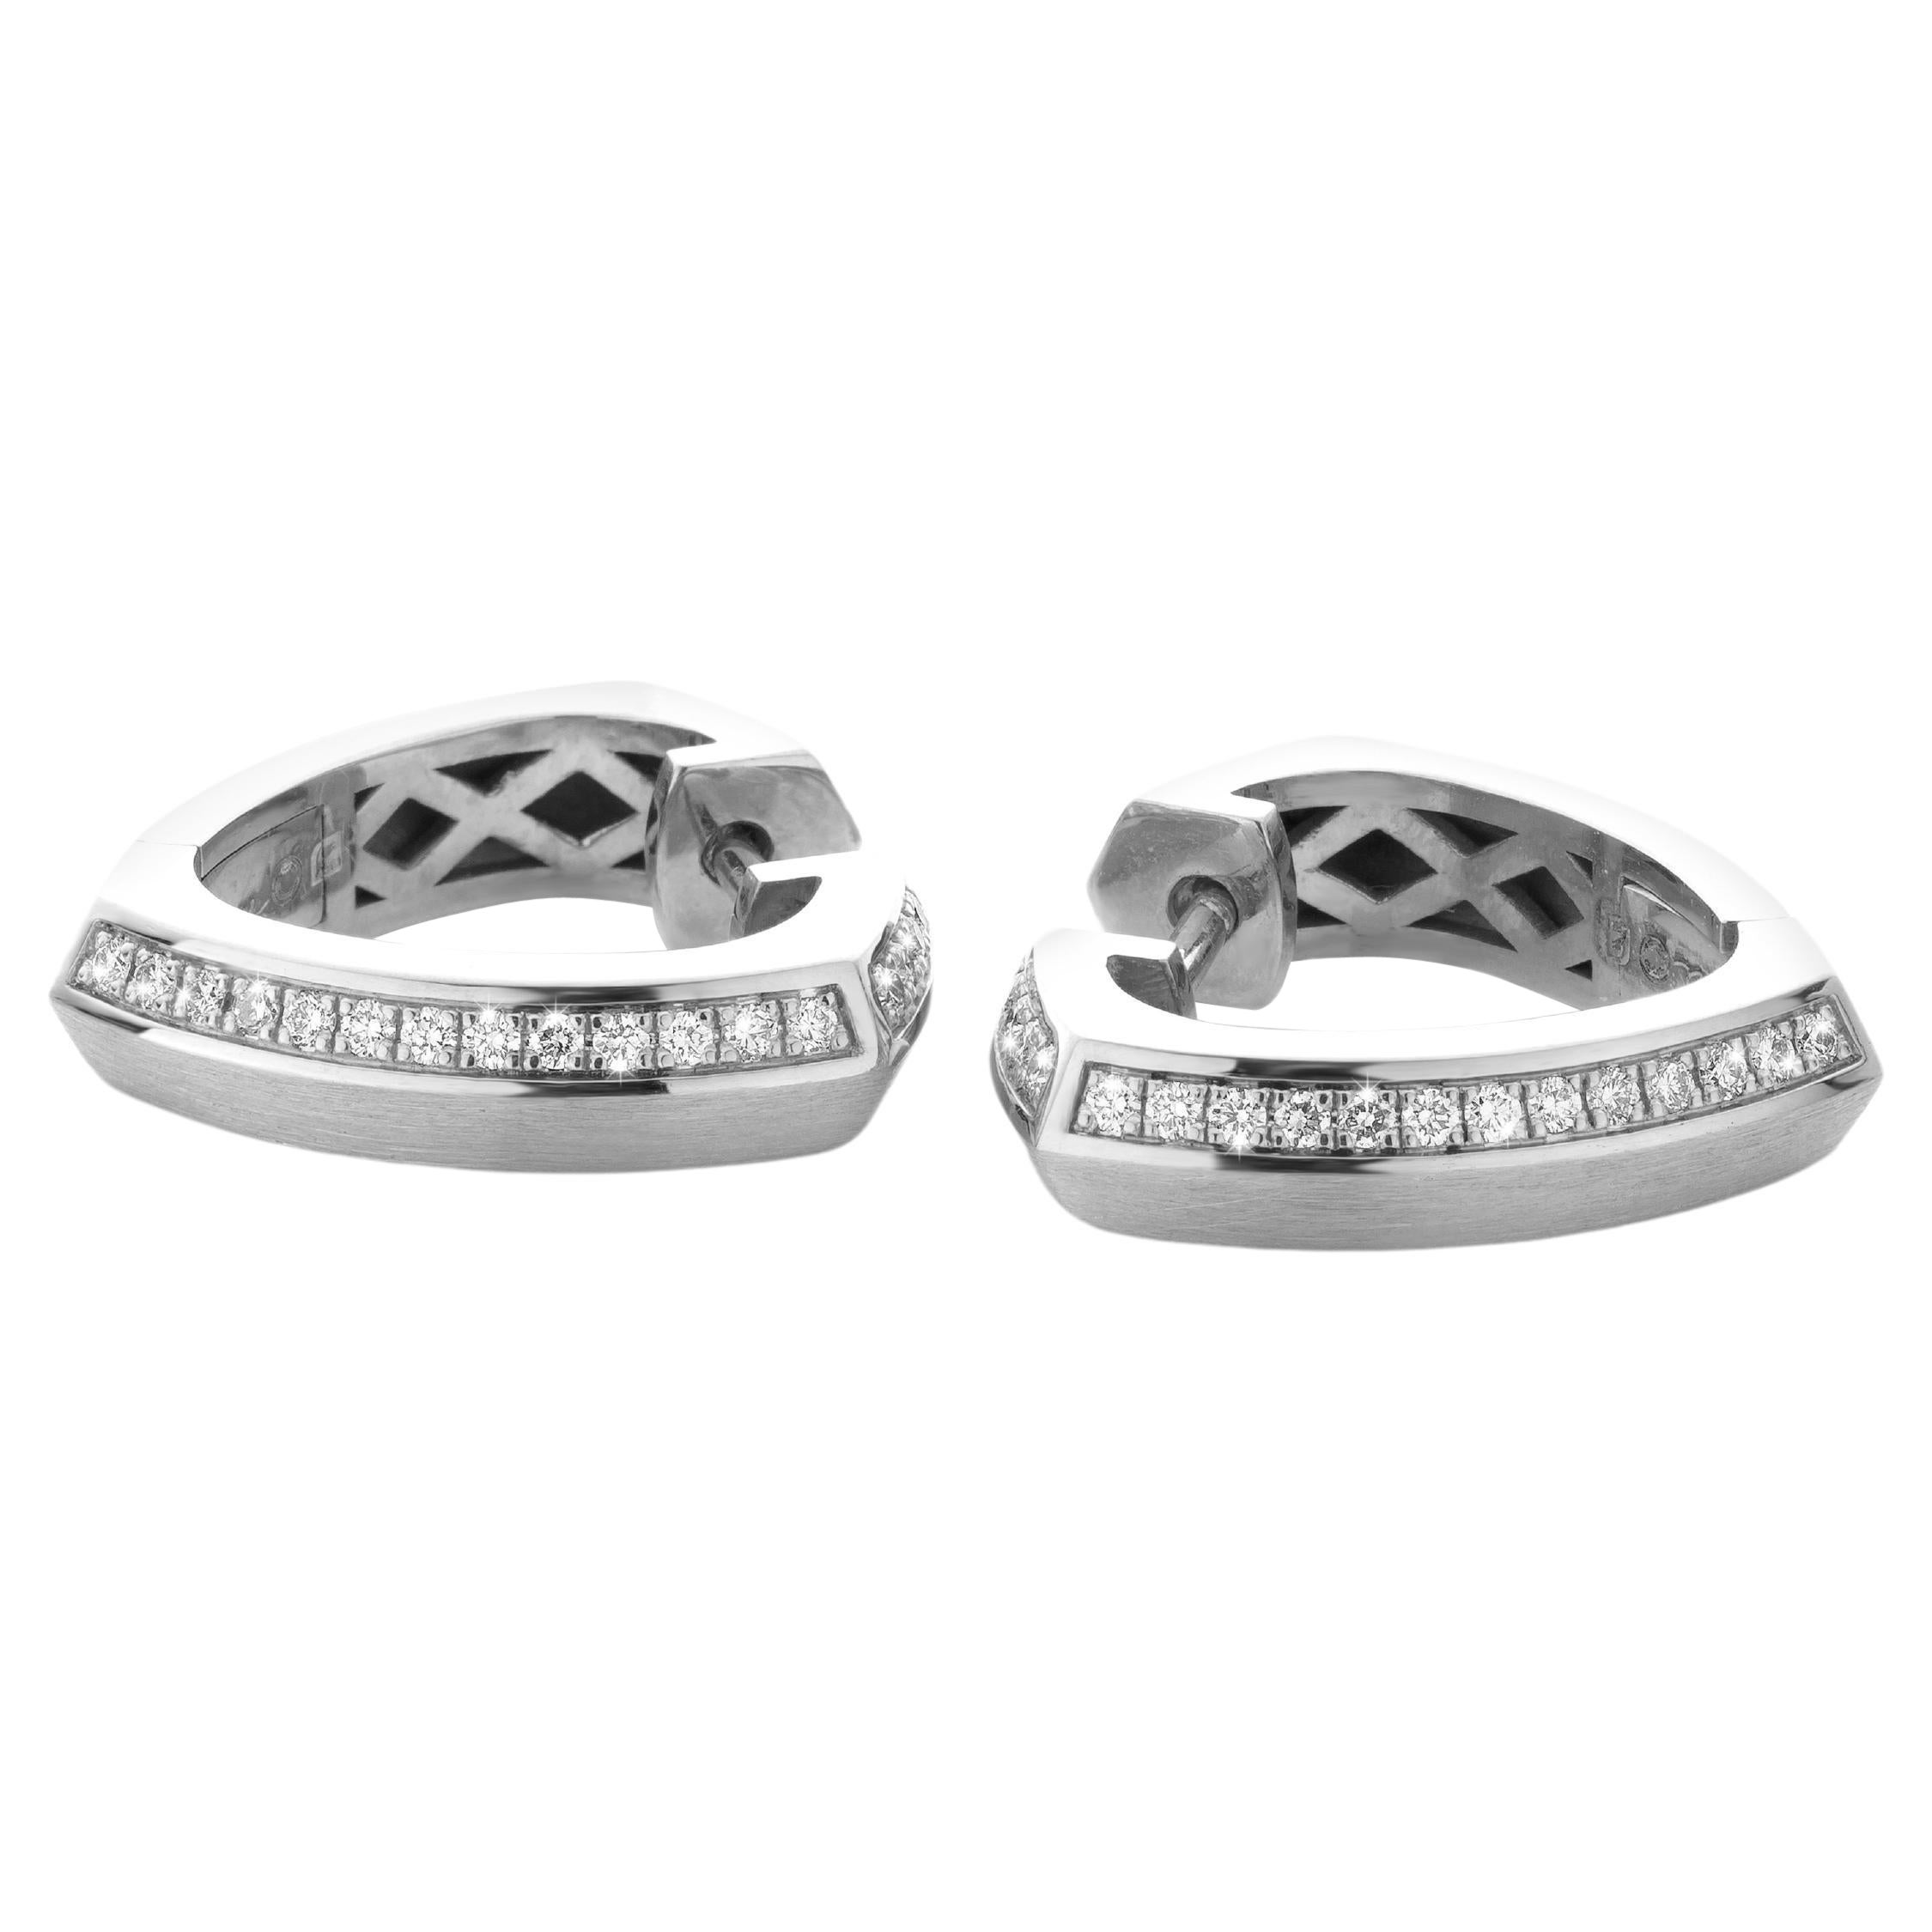 Cober with 42 Brilliant-cut Diamonds 0.294 Ct total weight White Gold Earrings For Sale